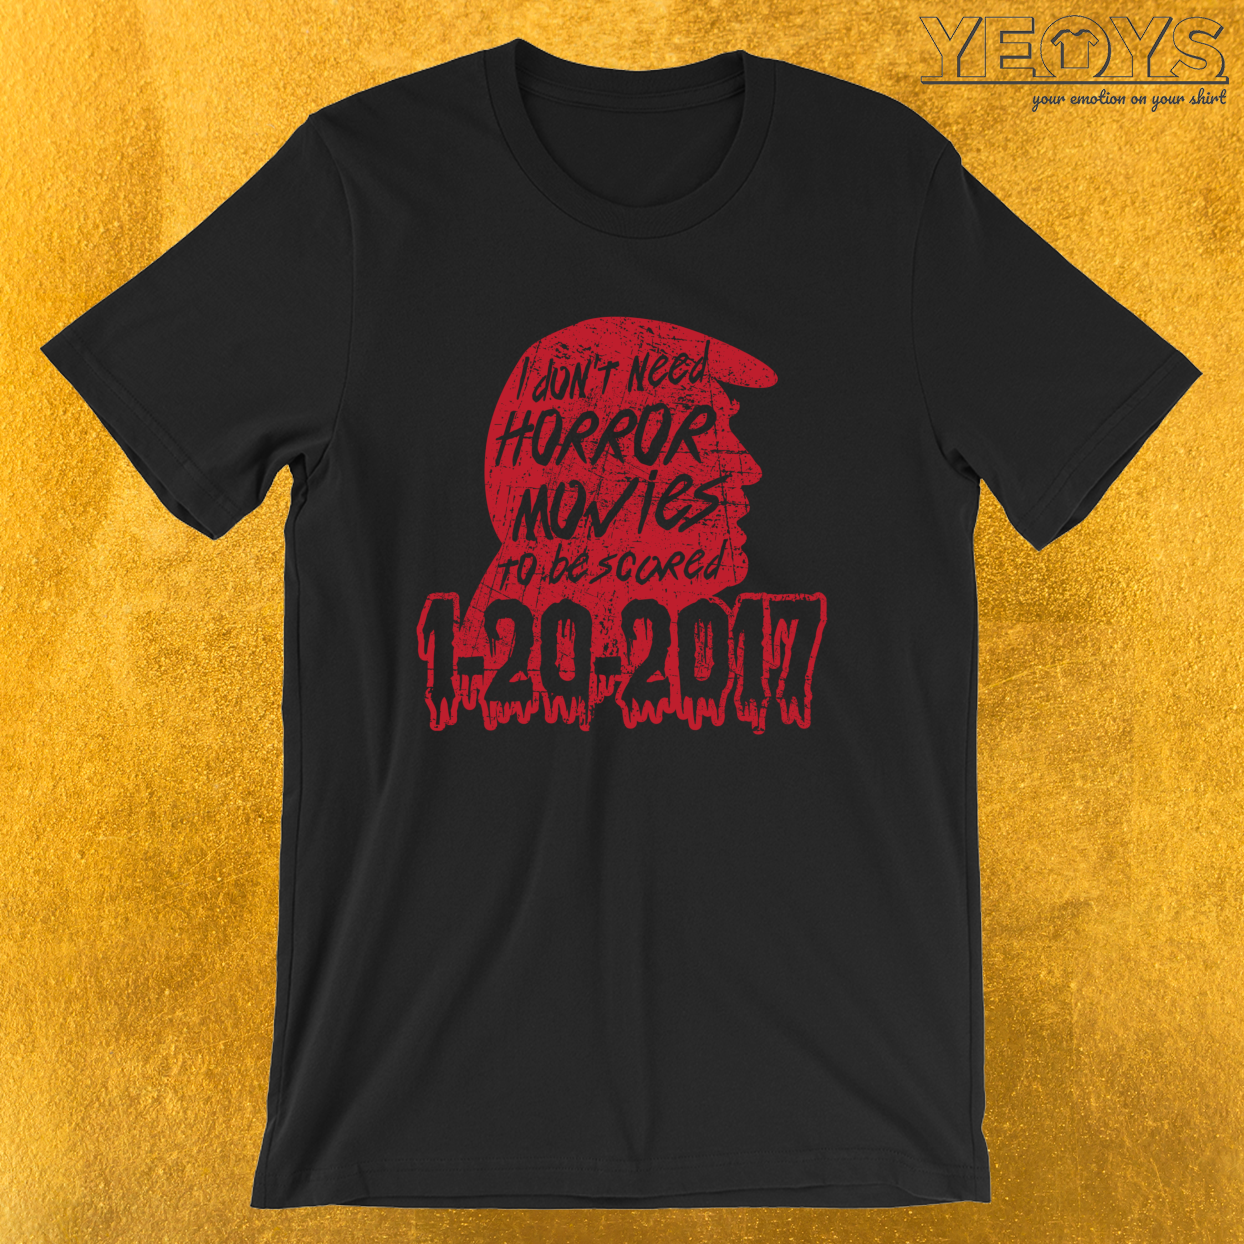 1-20-2017 I Don’t Need Horror Movies To Be Scared – Funny Horror Movie Tee